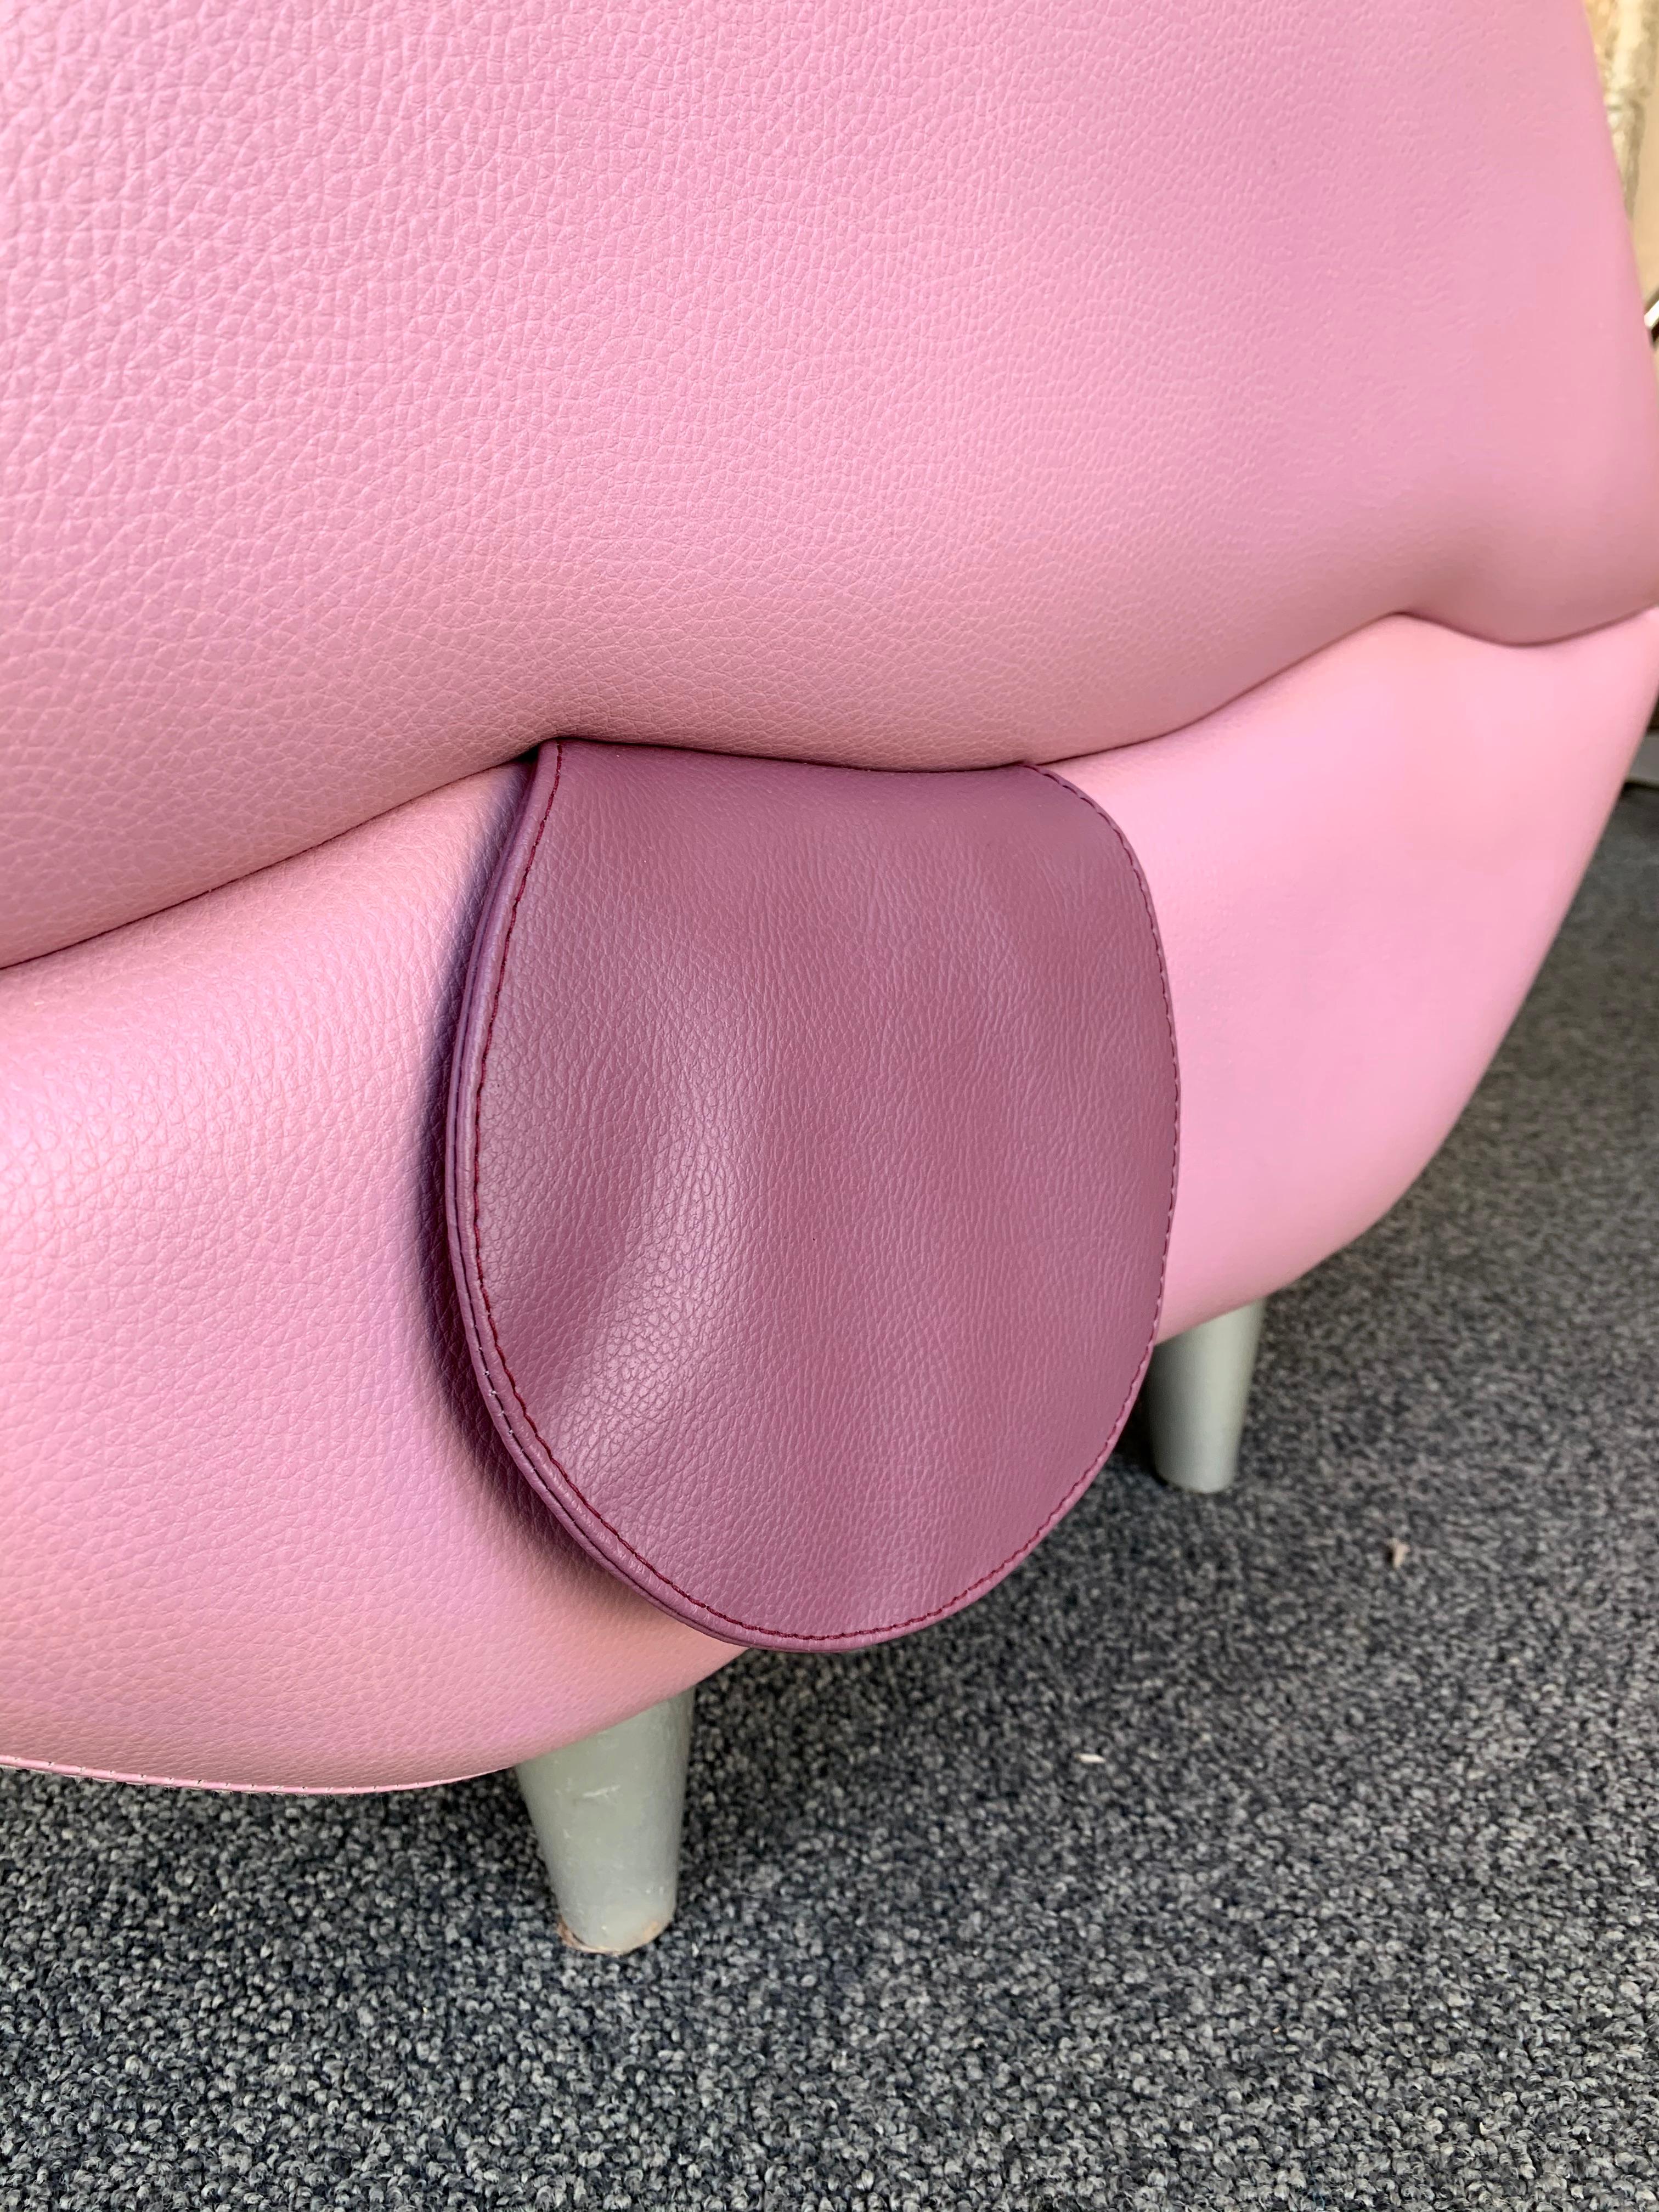 Pink and purple leather mouth pouf stool or ottoman.